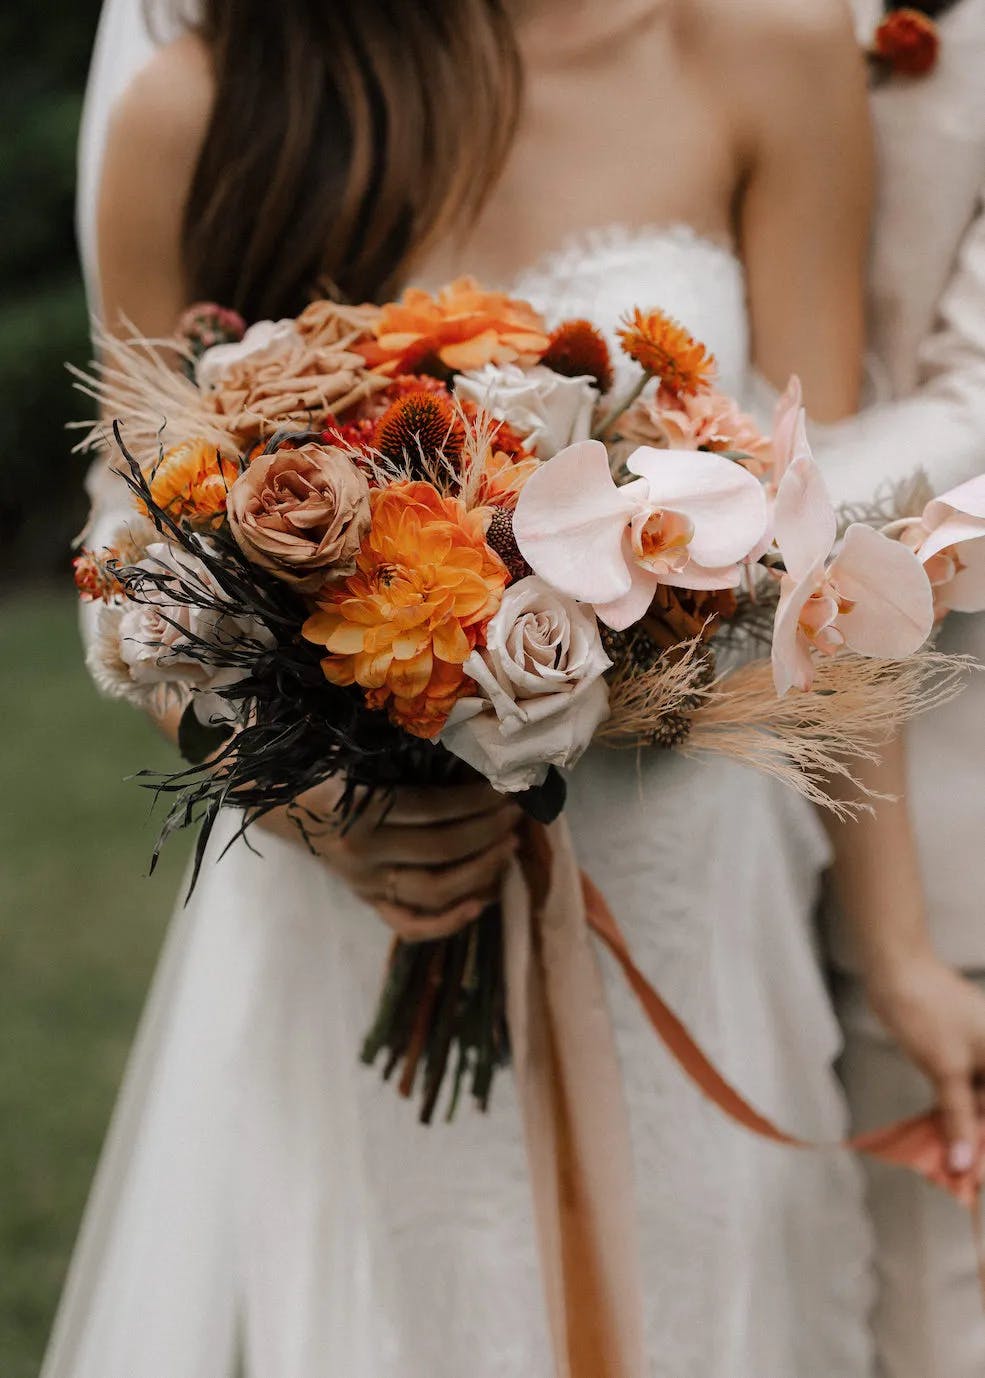 A bride in a strapless white wedding dress holding a vibrant bouquet featuring orange, peach, and white flowers with various greenery. Her partner stands behind her, partially visible, in a light-colored suit. The background is a lush, green outdoor setting.